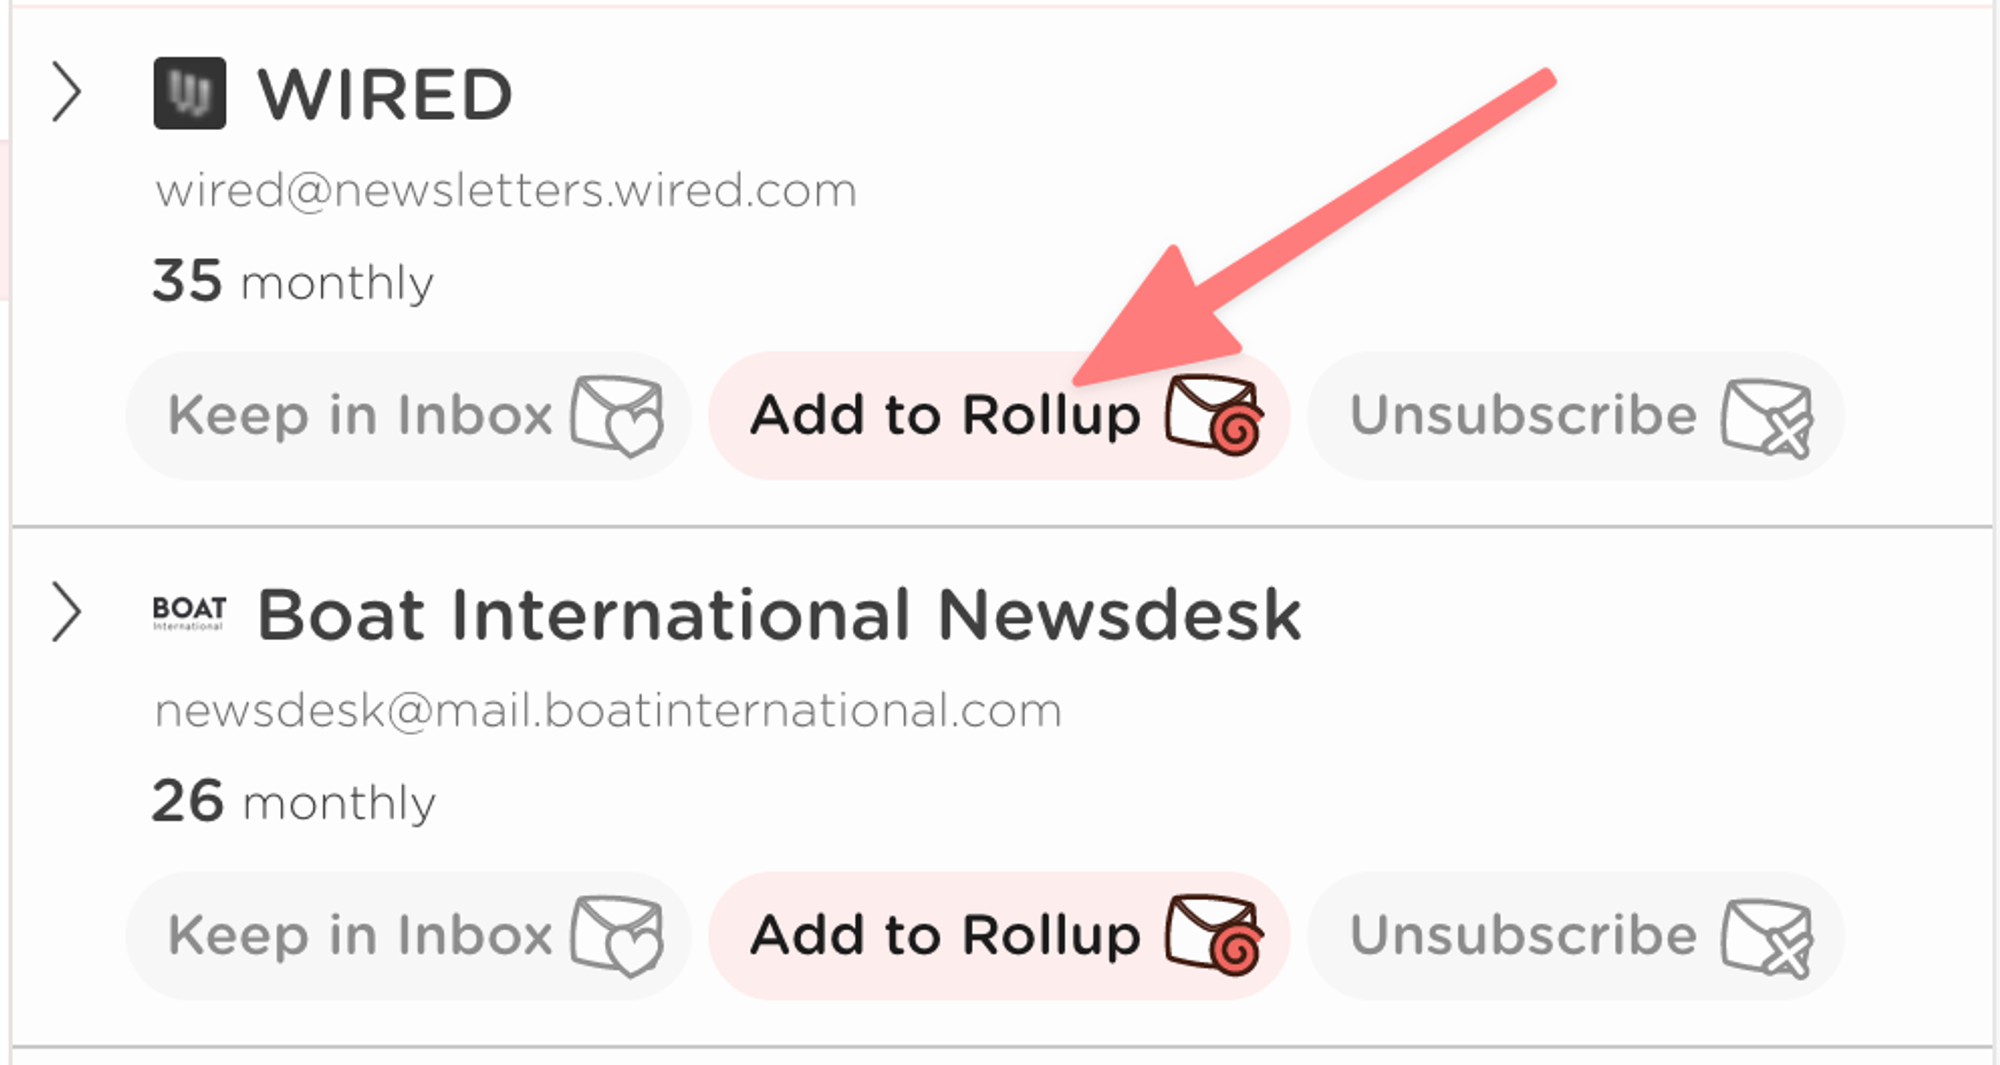 Toggle the "Add to Rollup" button off to remove a sender from your Rollup